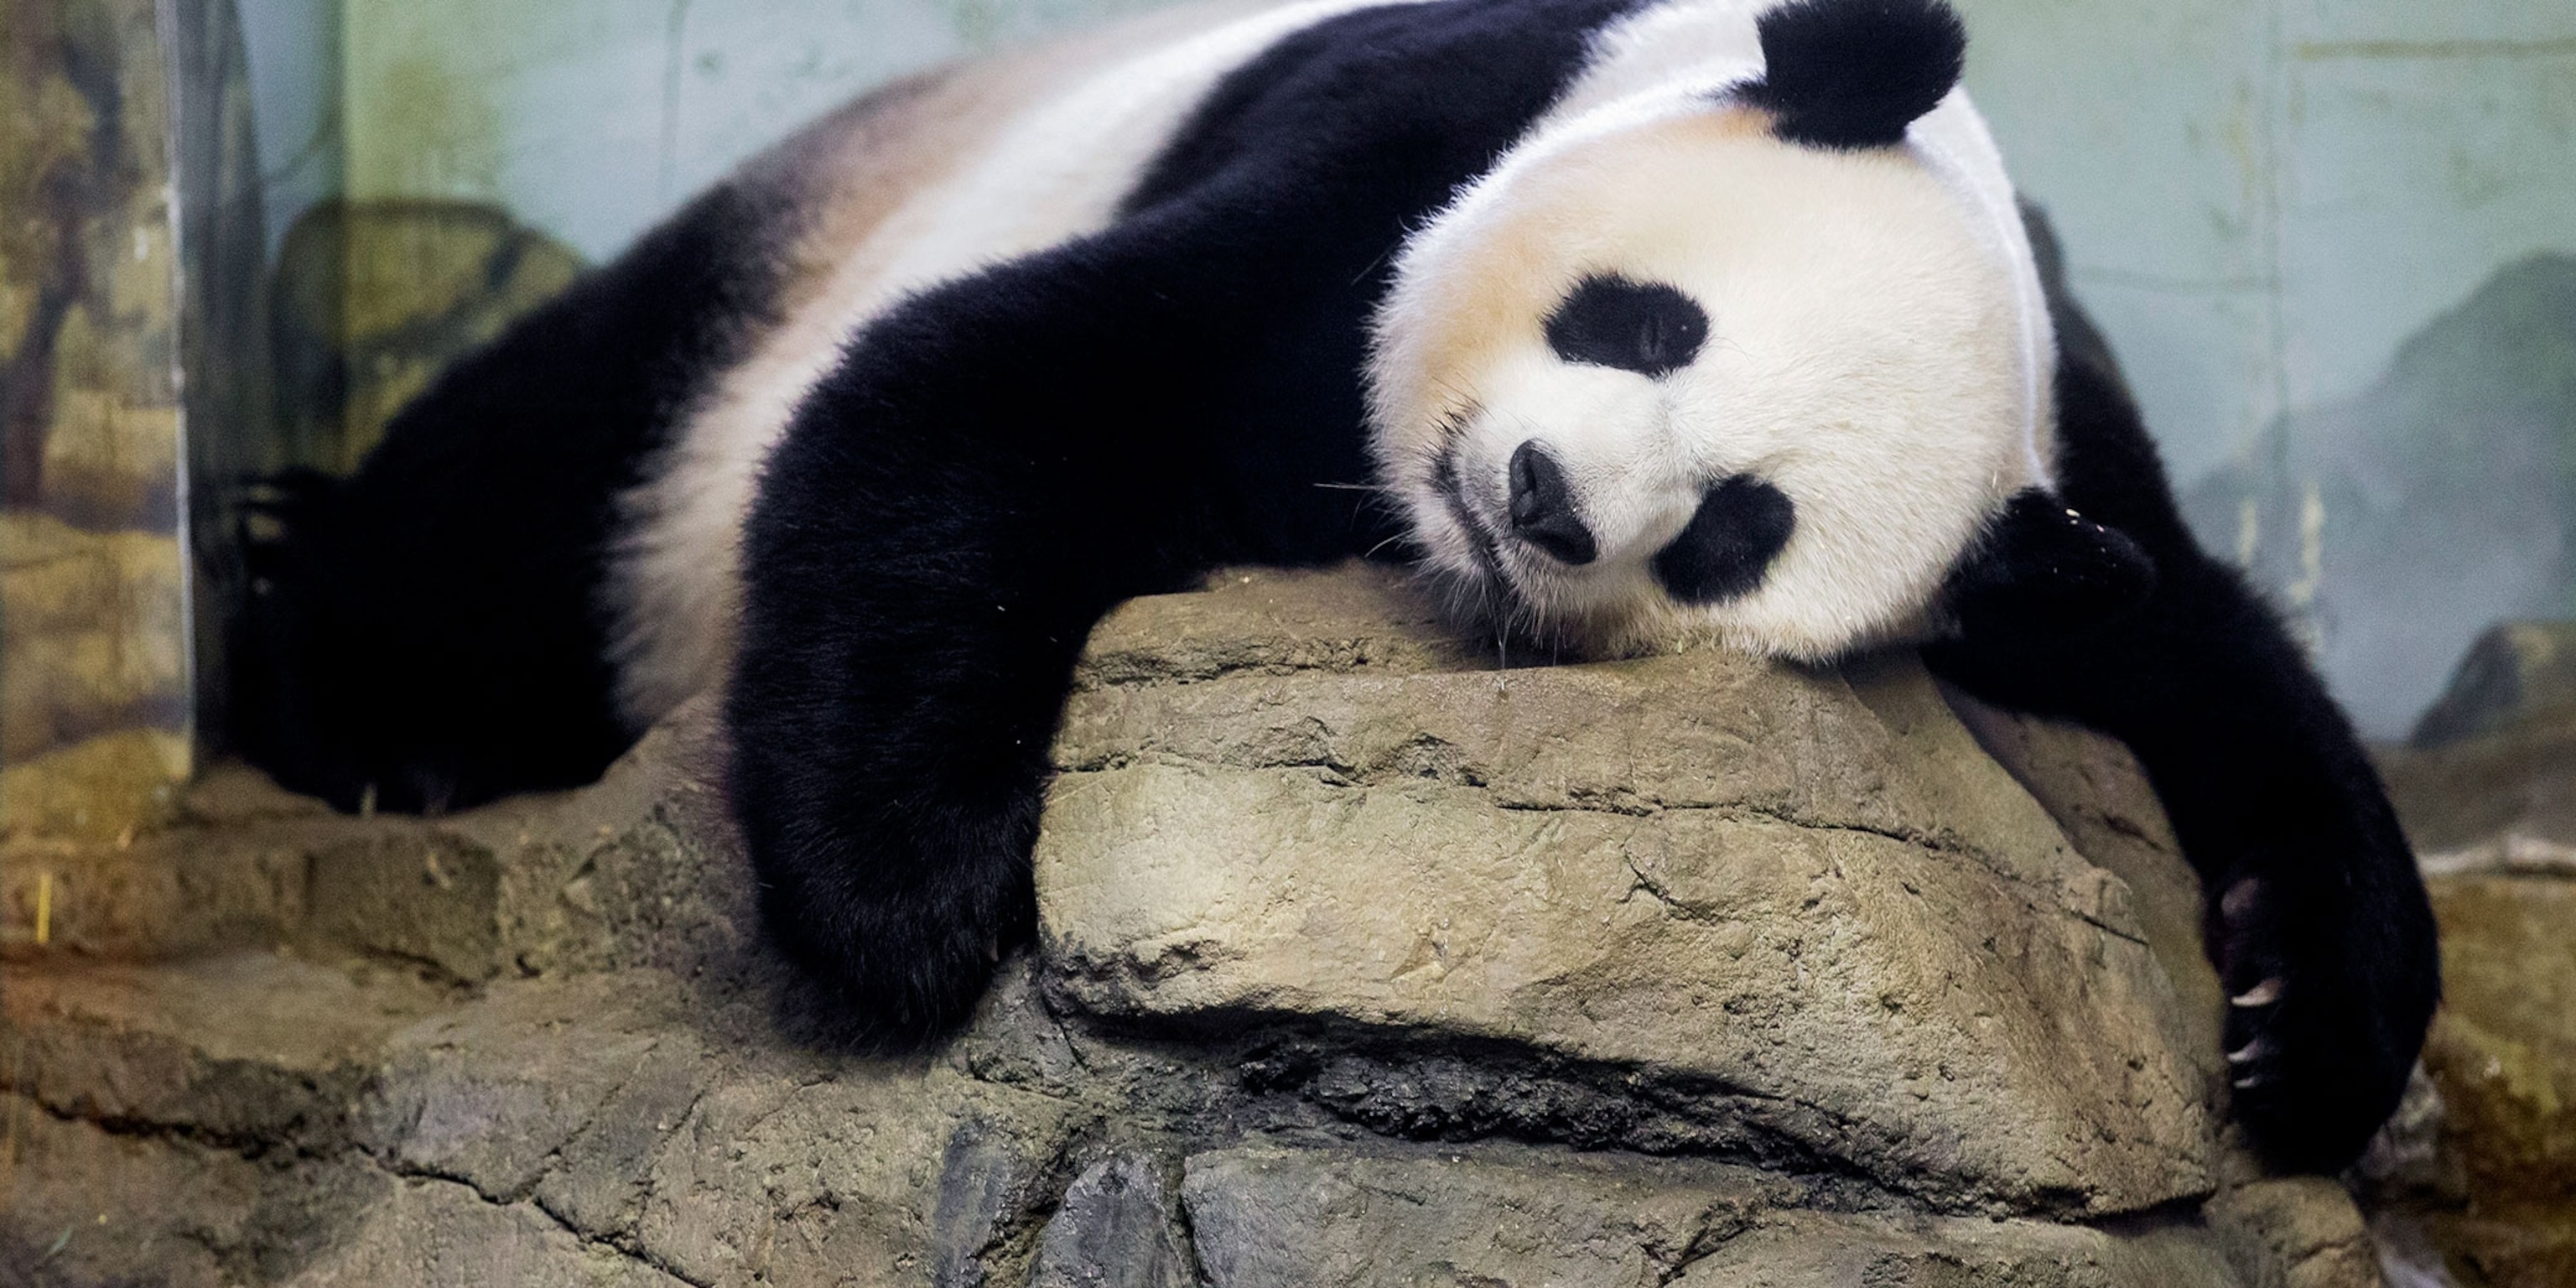 How long is a panda pregnant for?